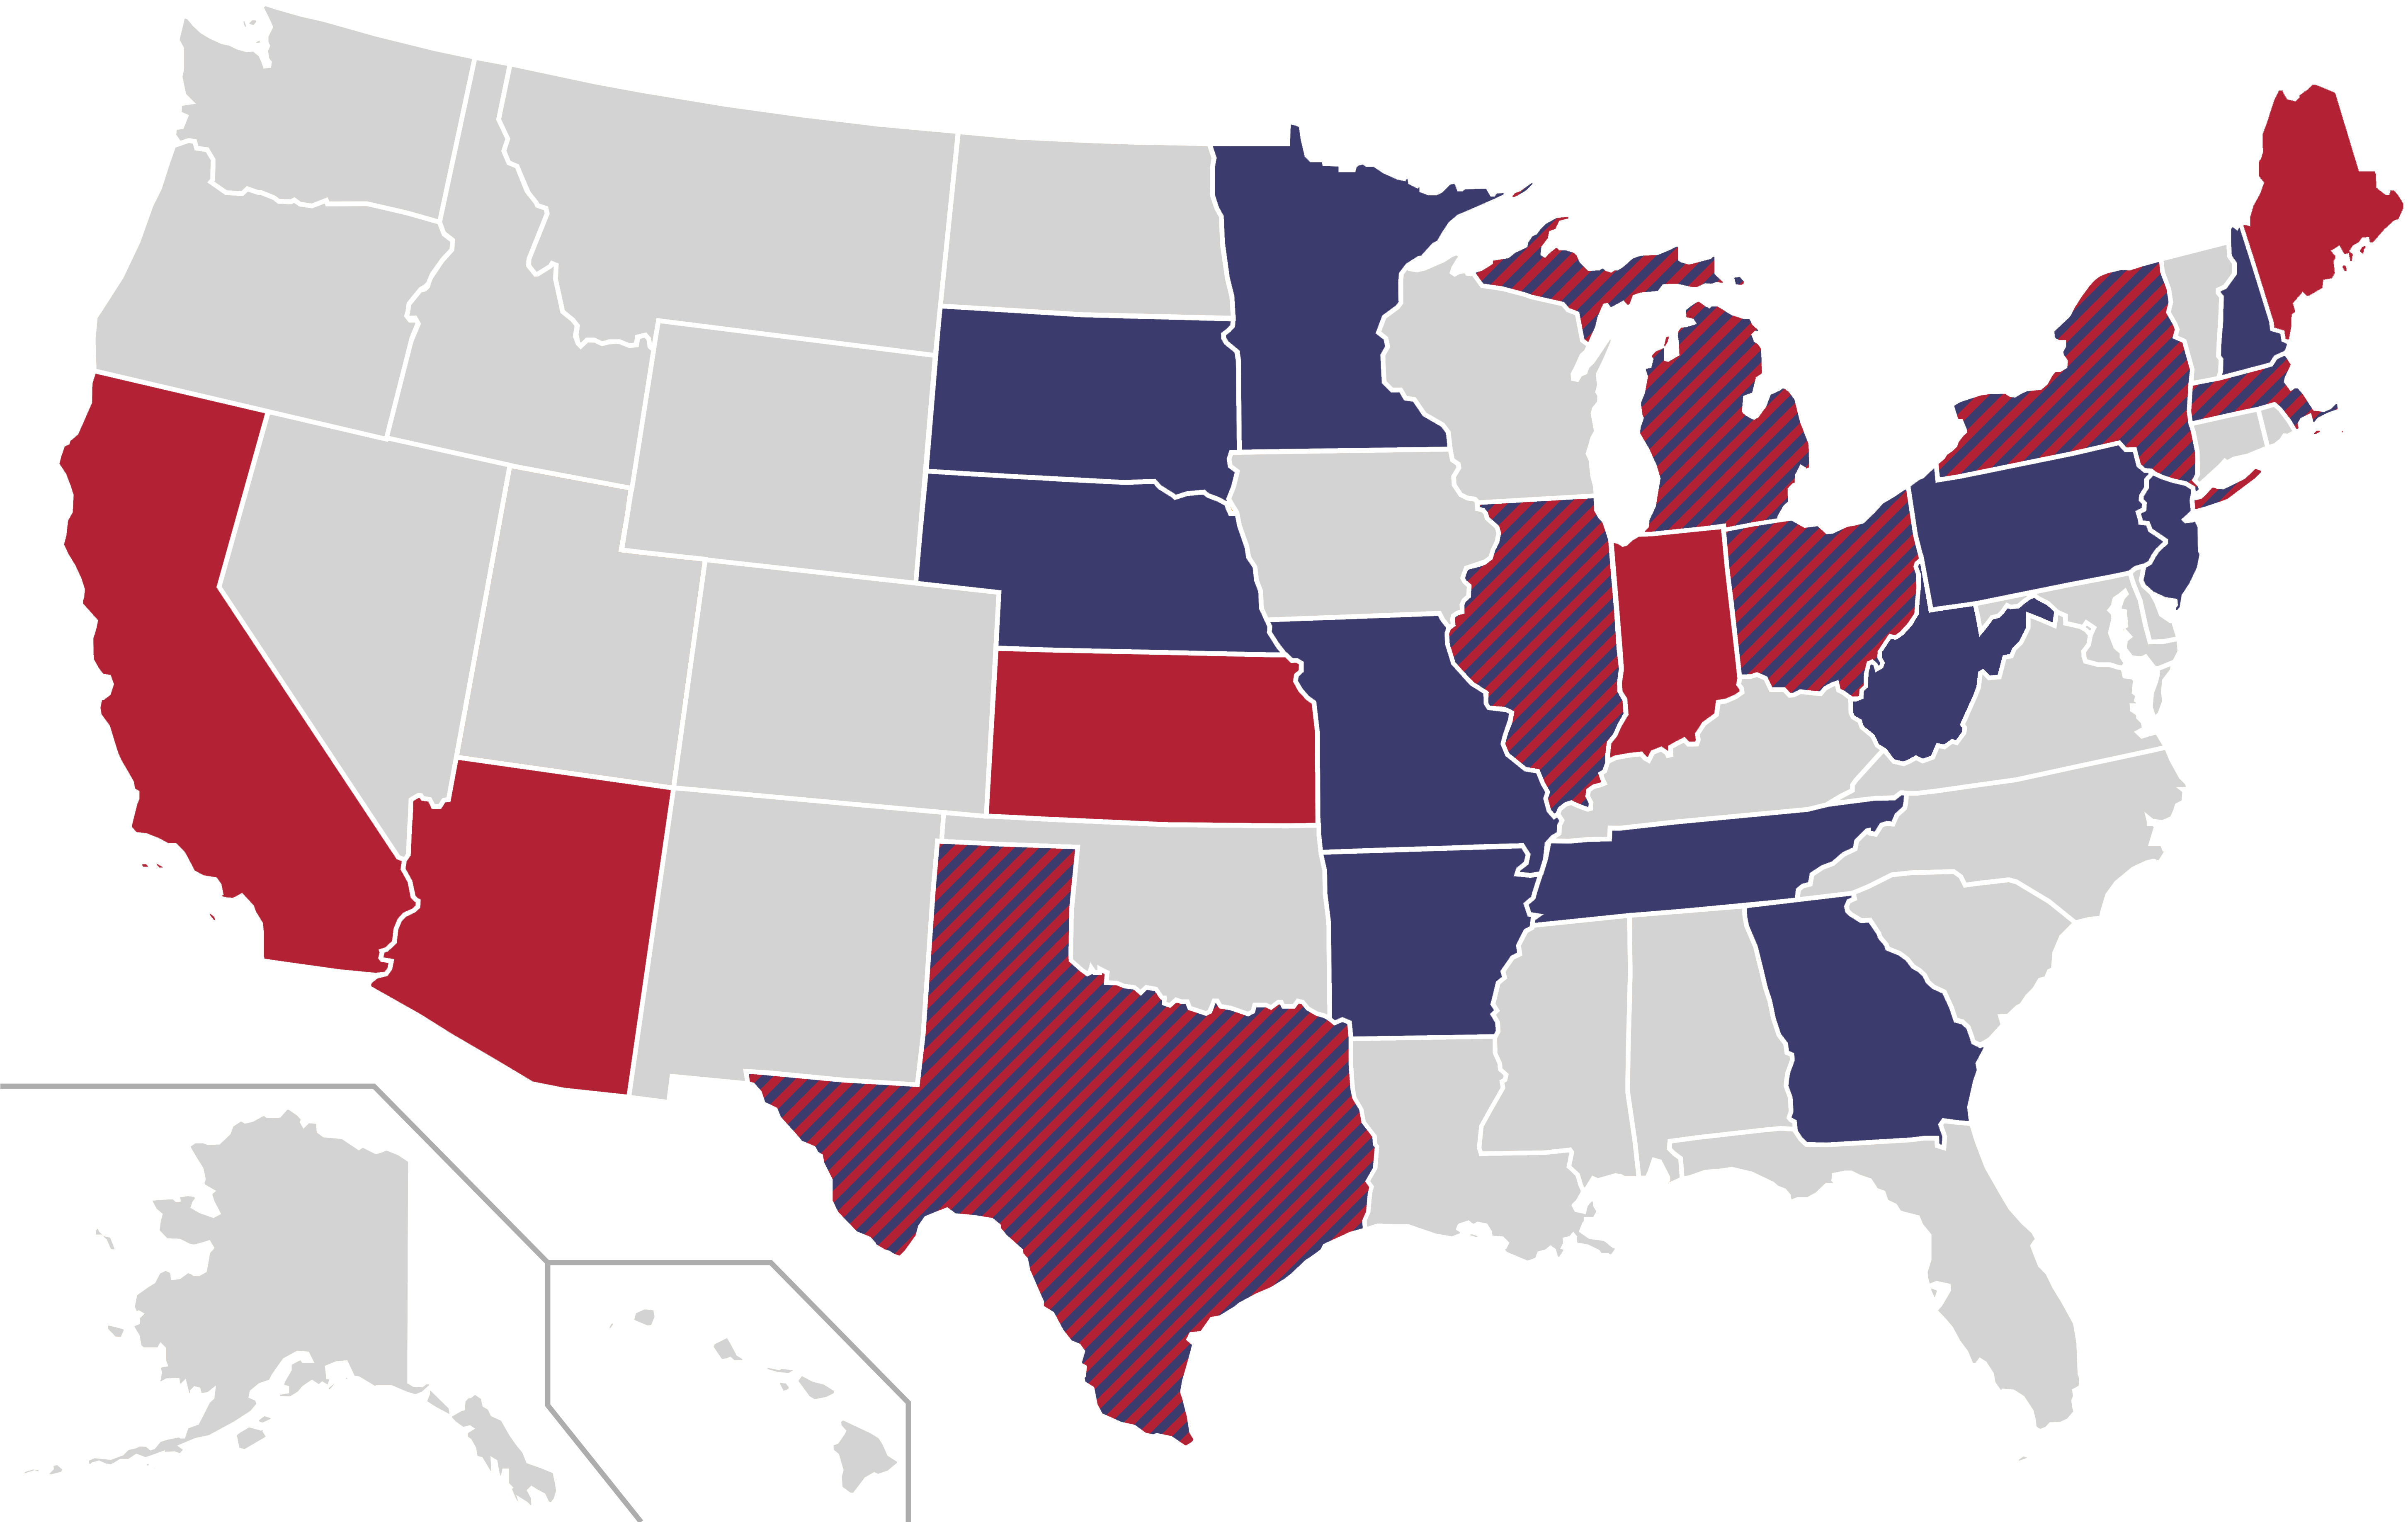 Combined Home States Of Democratic Party And Republican - John F. Kennedy Library (6000x3710)